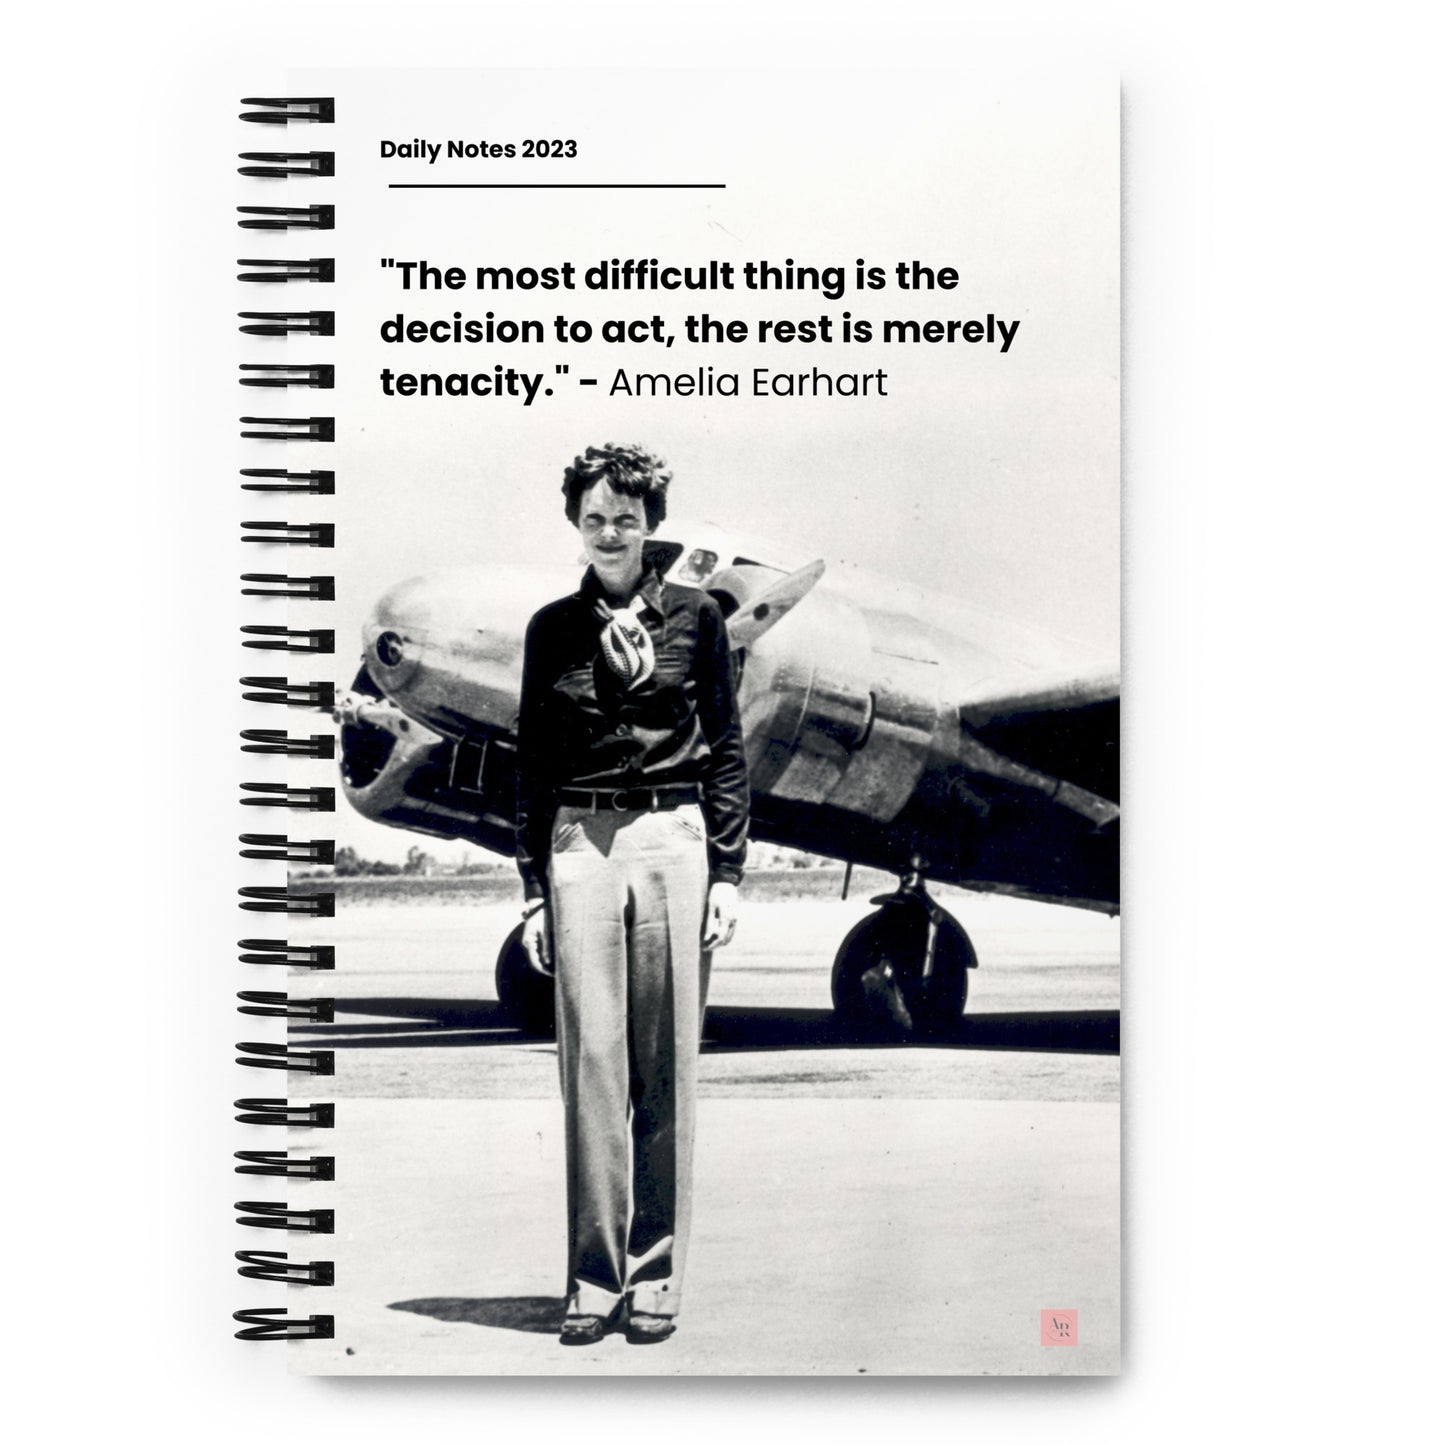 AeR Daily Notes (Amelia Earhart)